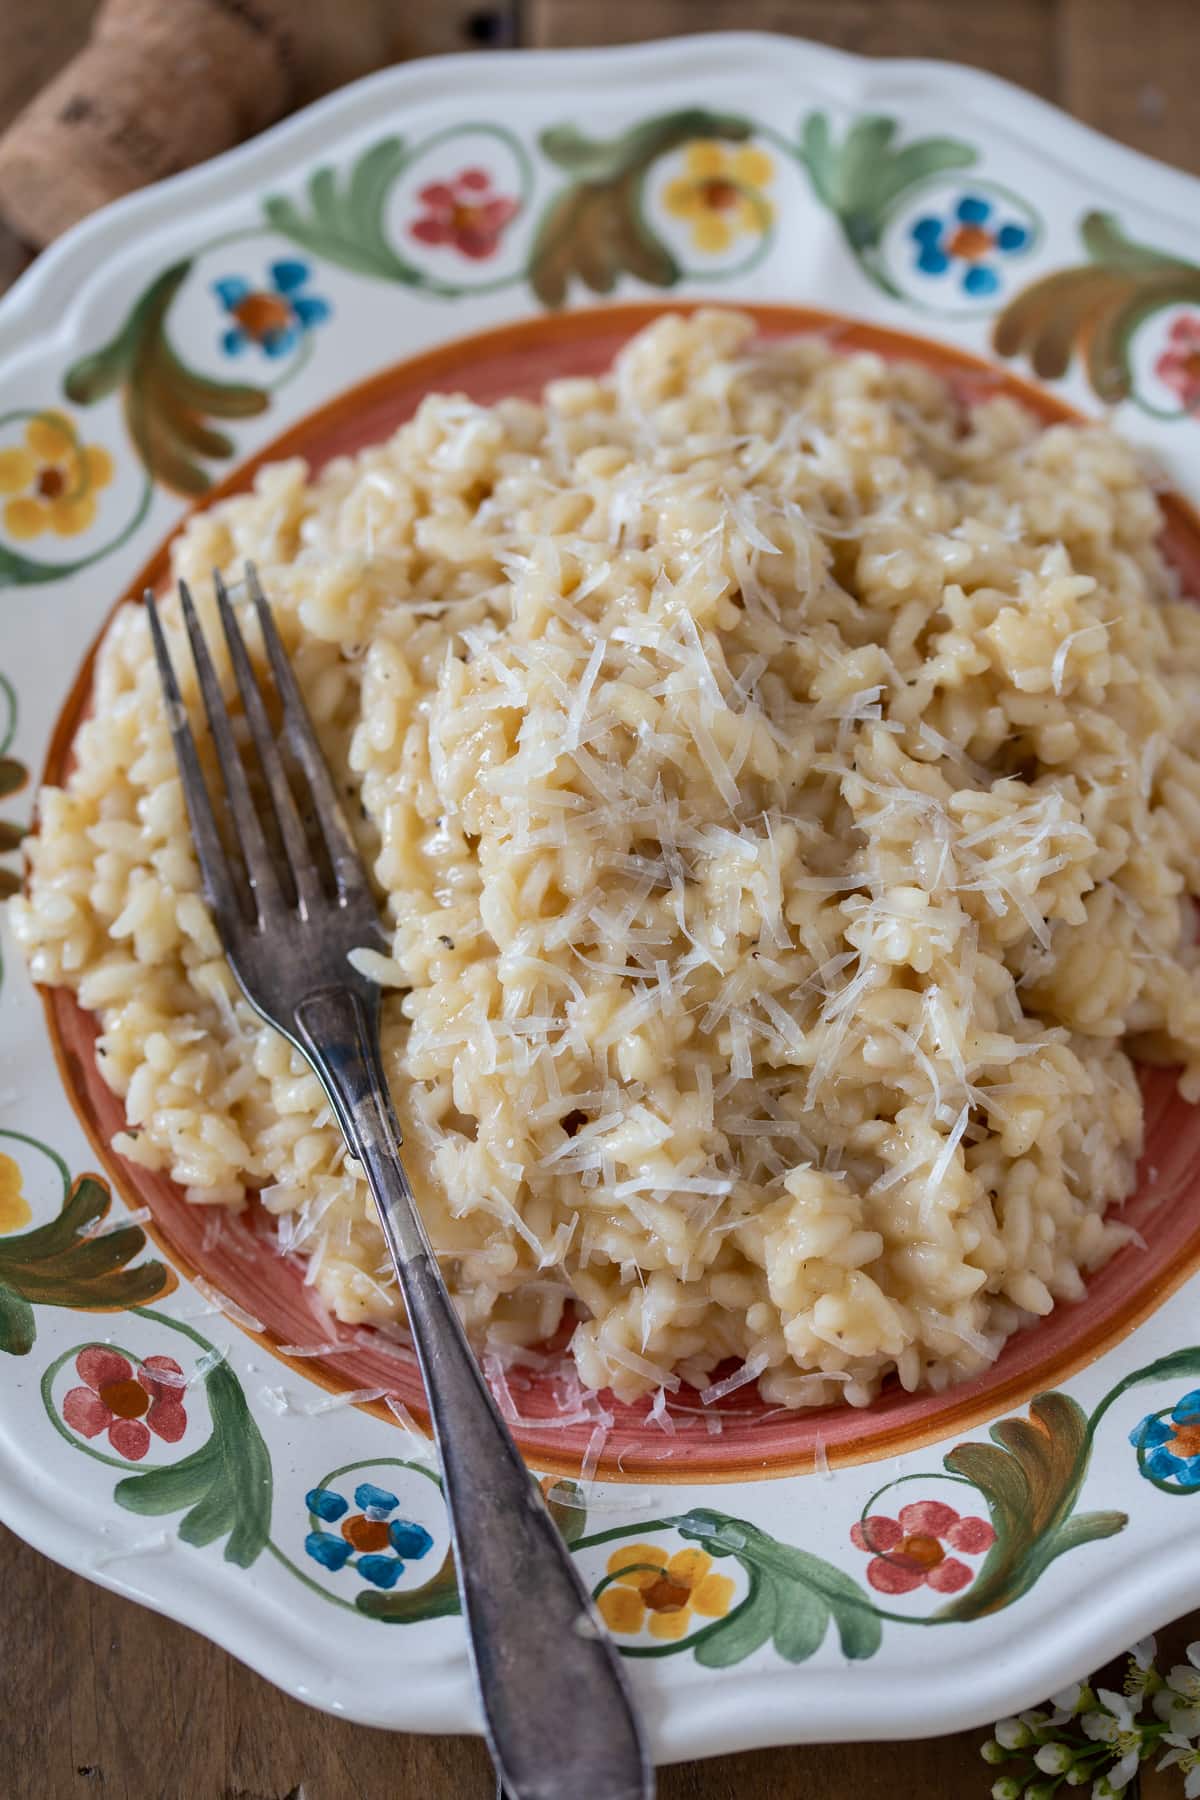 prosecco-risotto-06 • Electric Blue Food - Kitchen stories from abroad